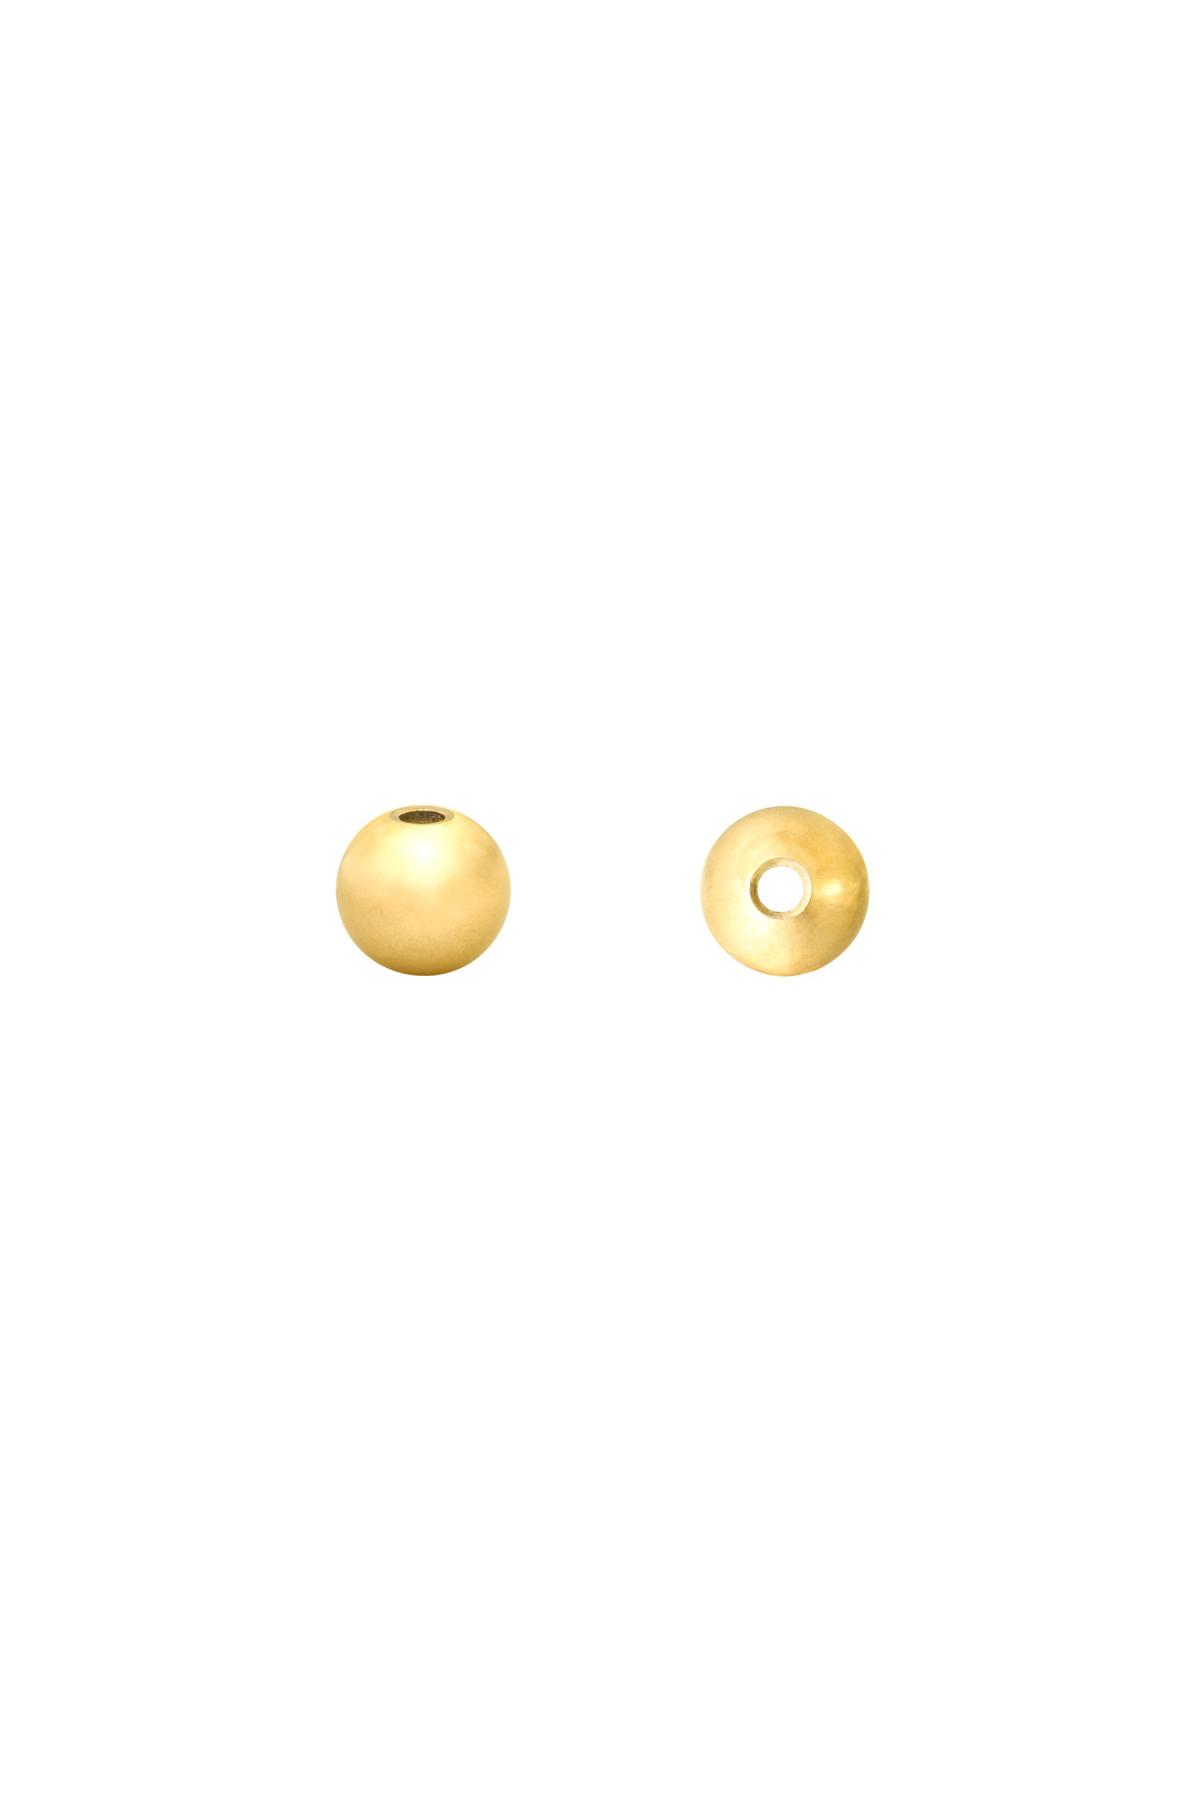 DIY Beads Ball 4MM Gold Stainless Steel